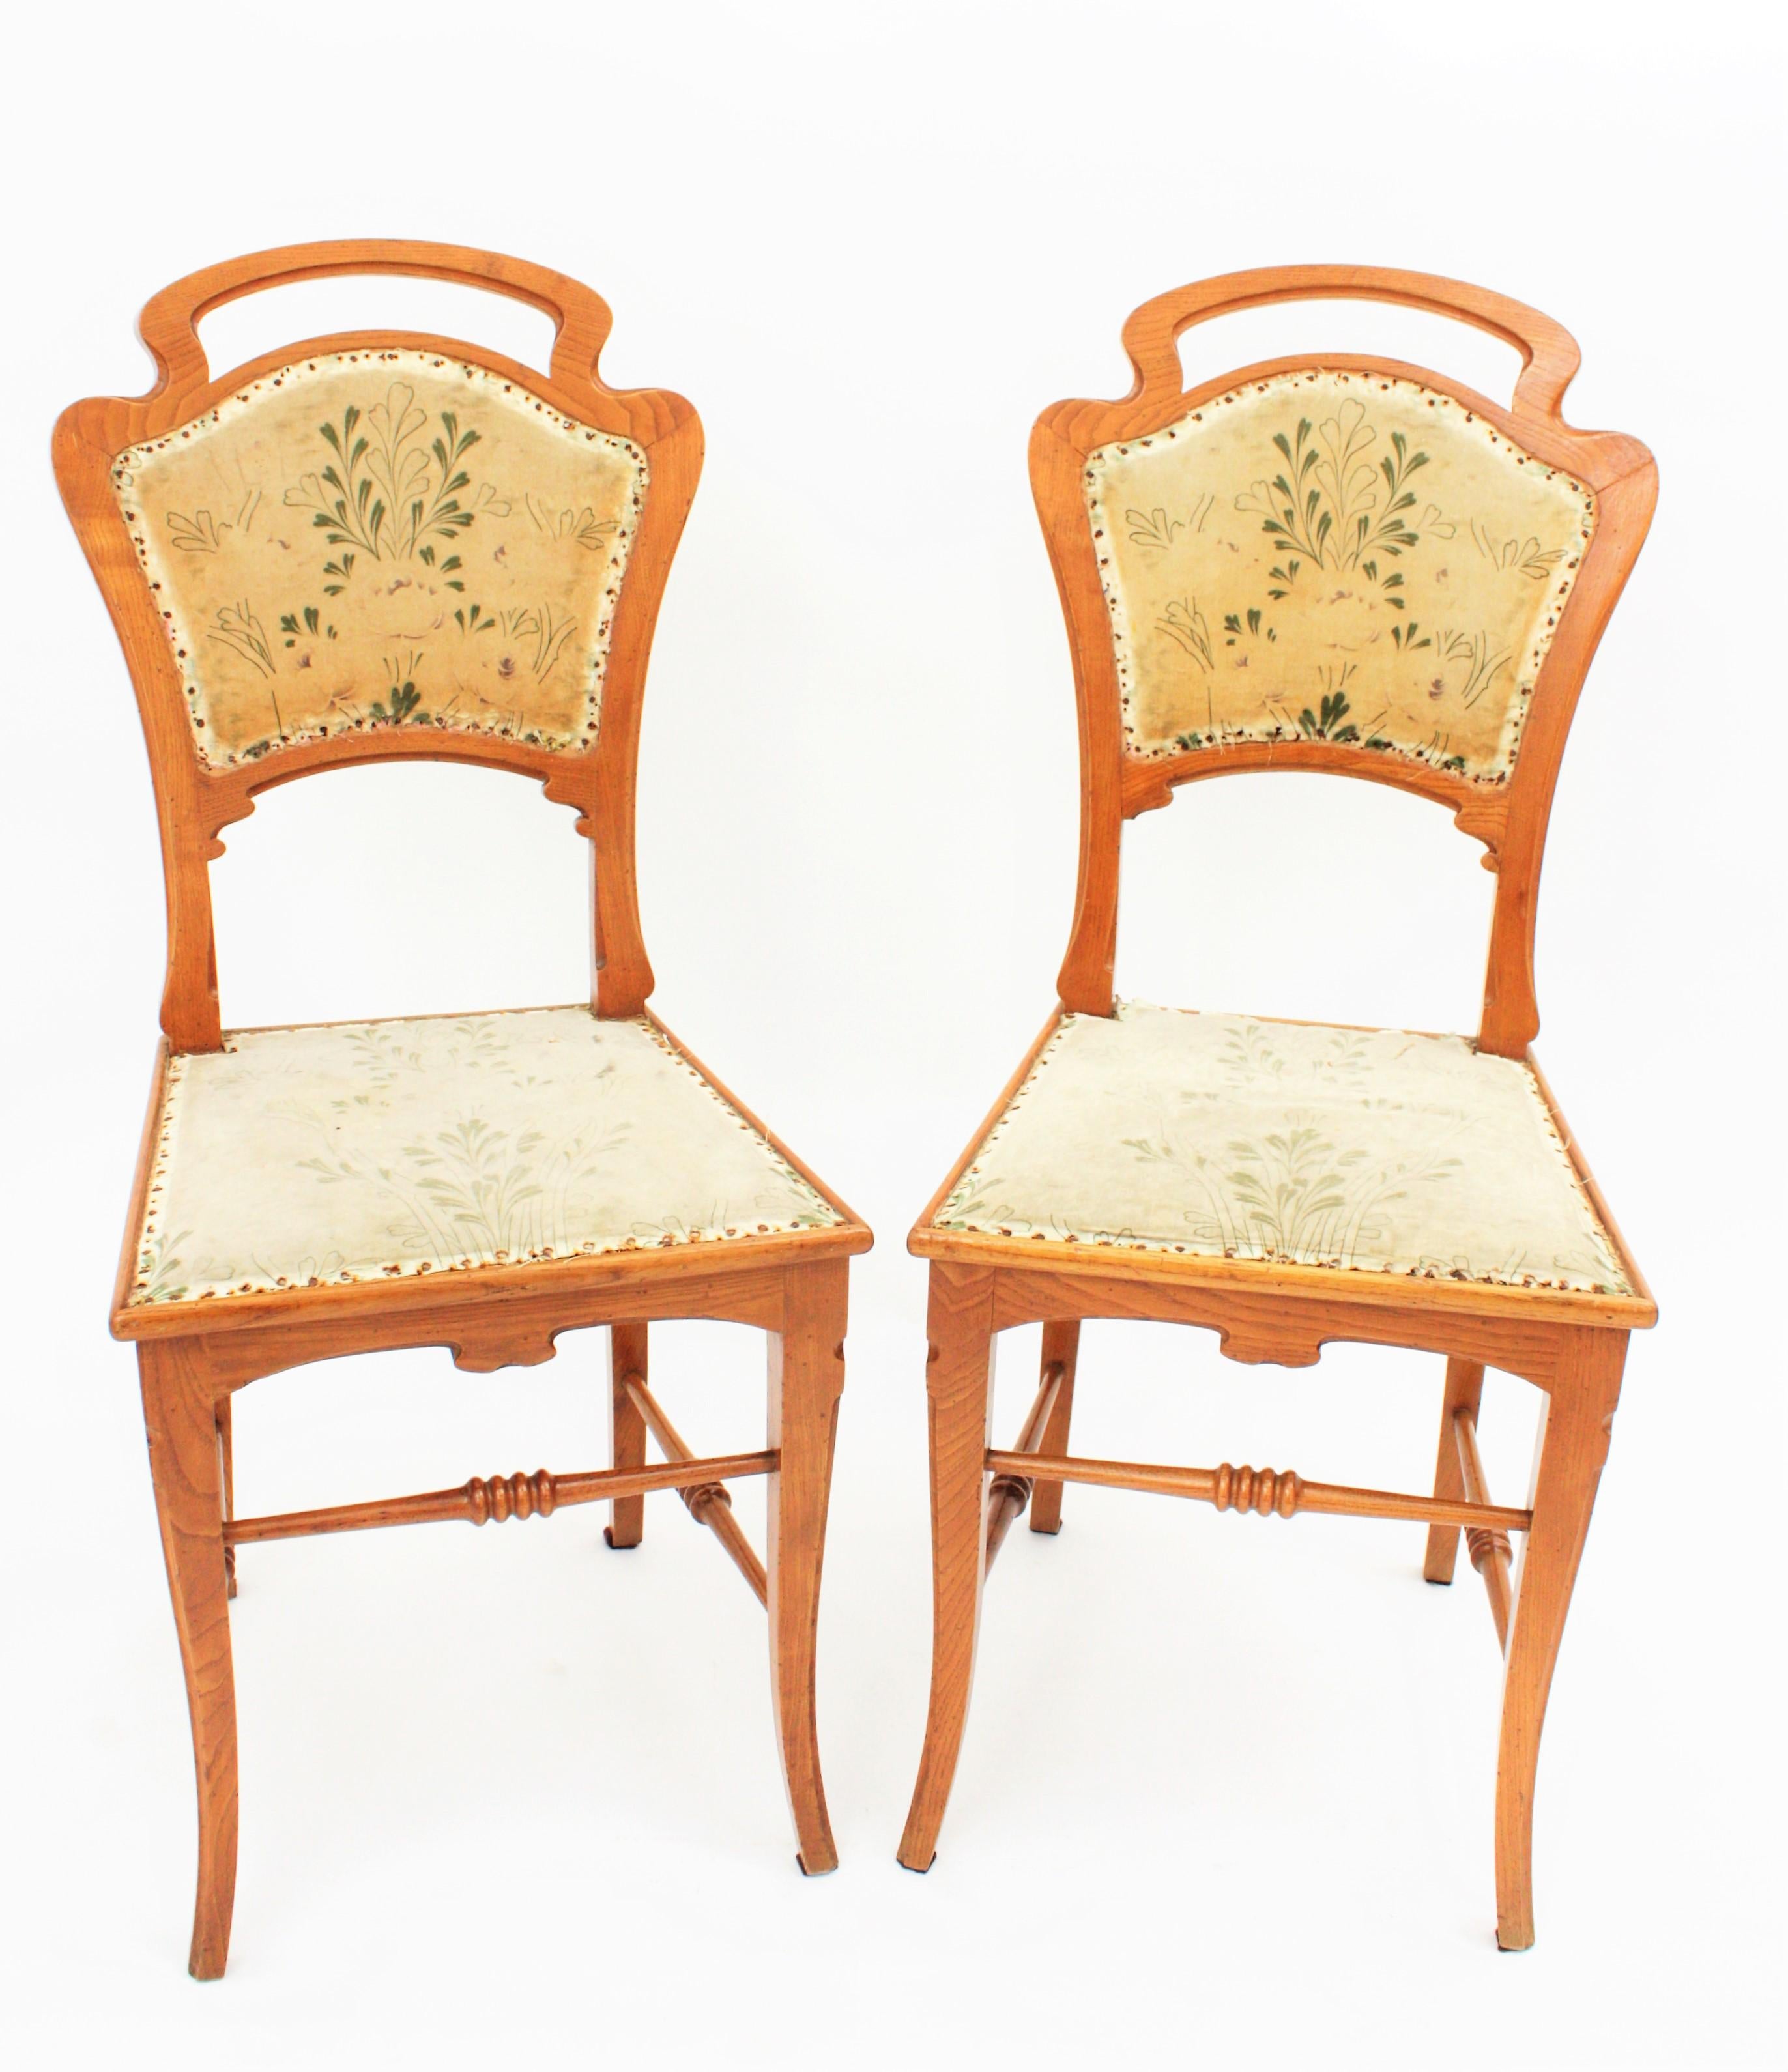 Hand-Carved Spanish Art Nouveau Antoni Gaudi Style Pair of Carved Ashwood Side Chairs For Sale